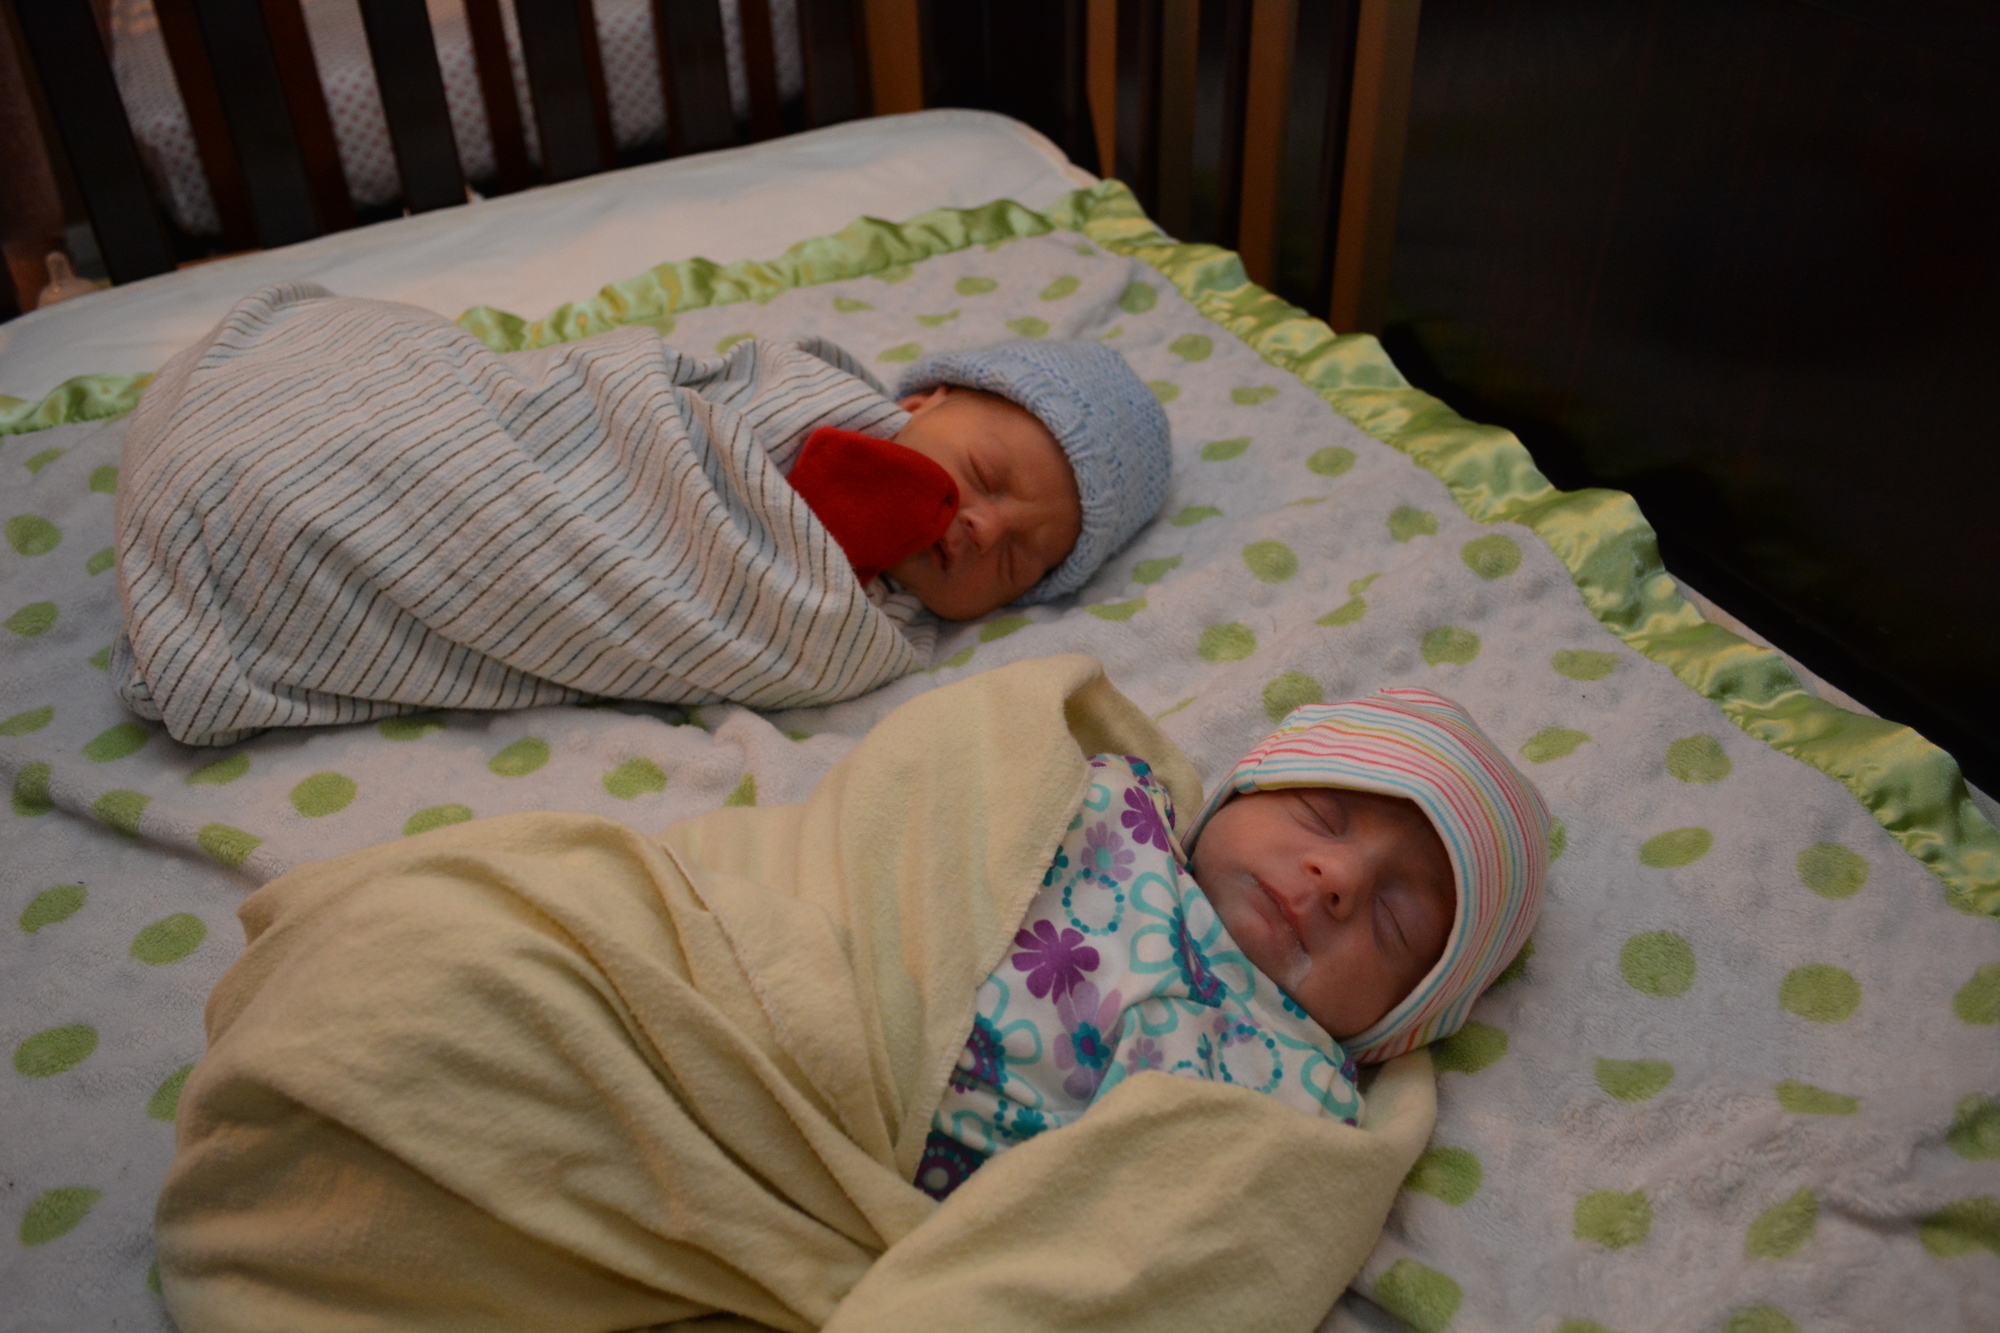 Dominick and Kaitlynn Keyworth rest together in one of four cribs in a second bedroom.